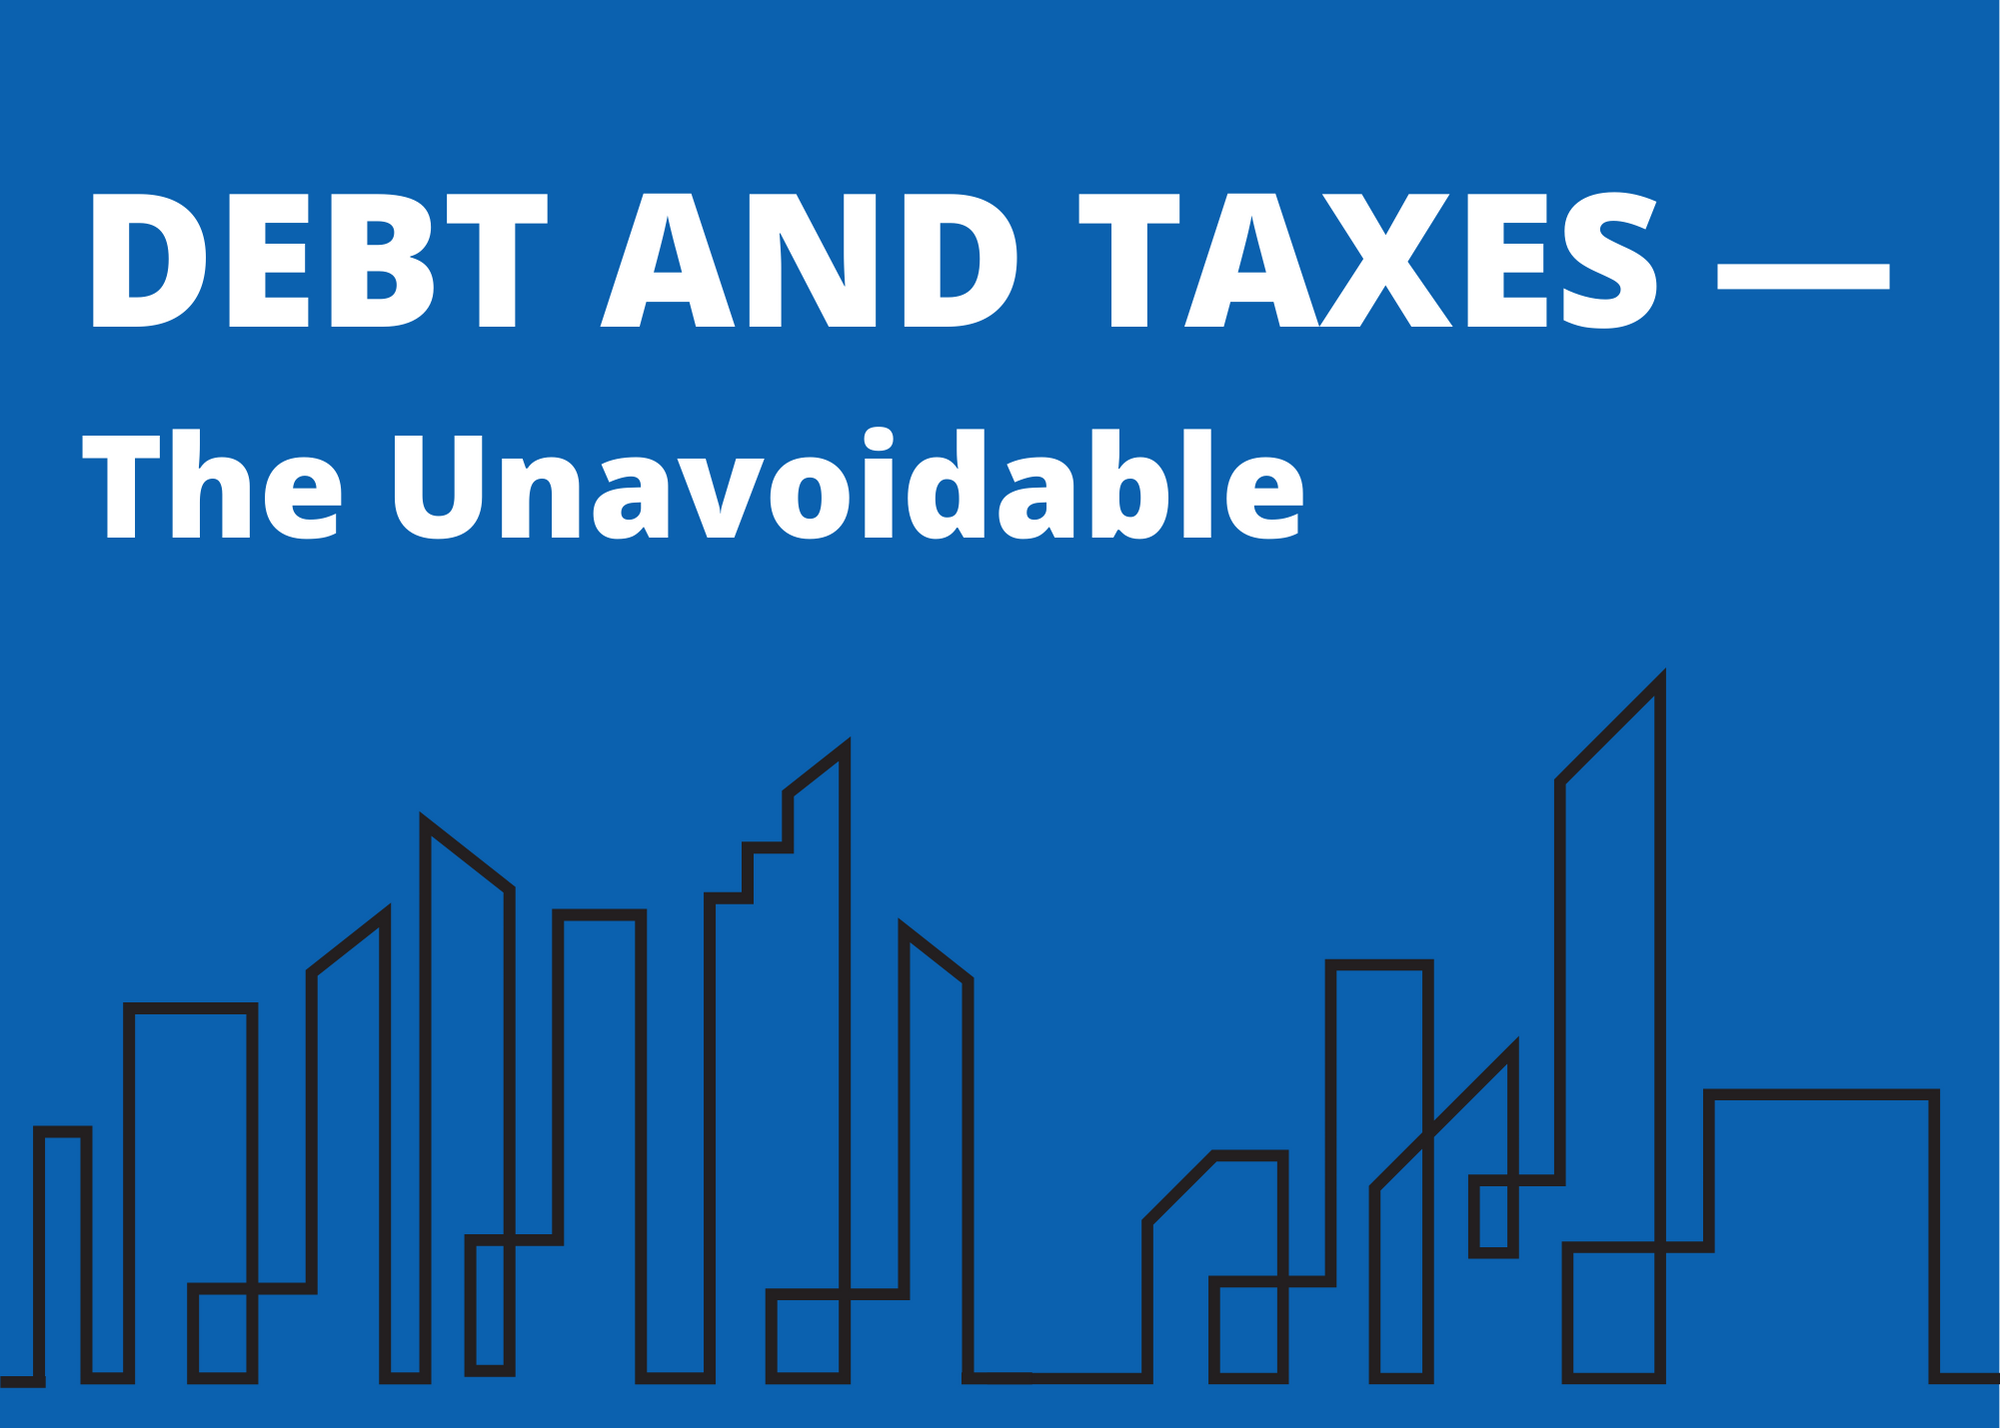 debt and taxes in commercial real estate are unavoidable